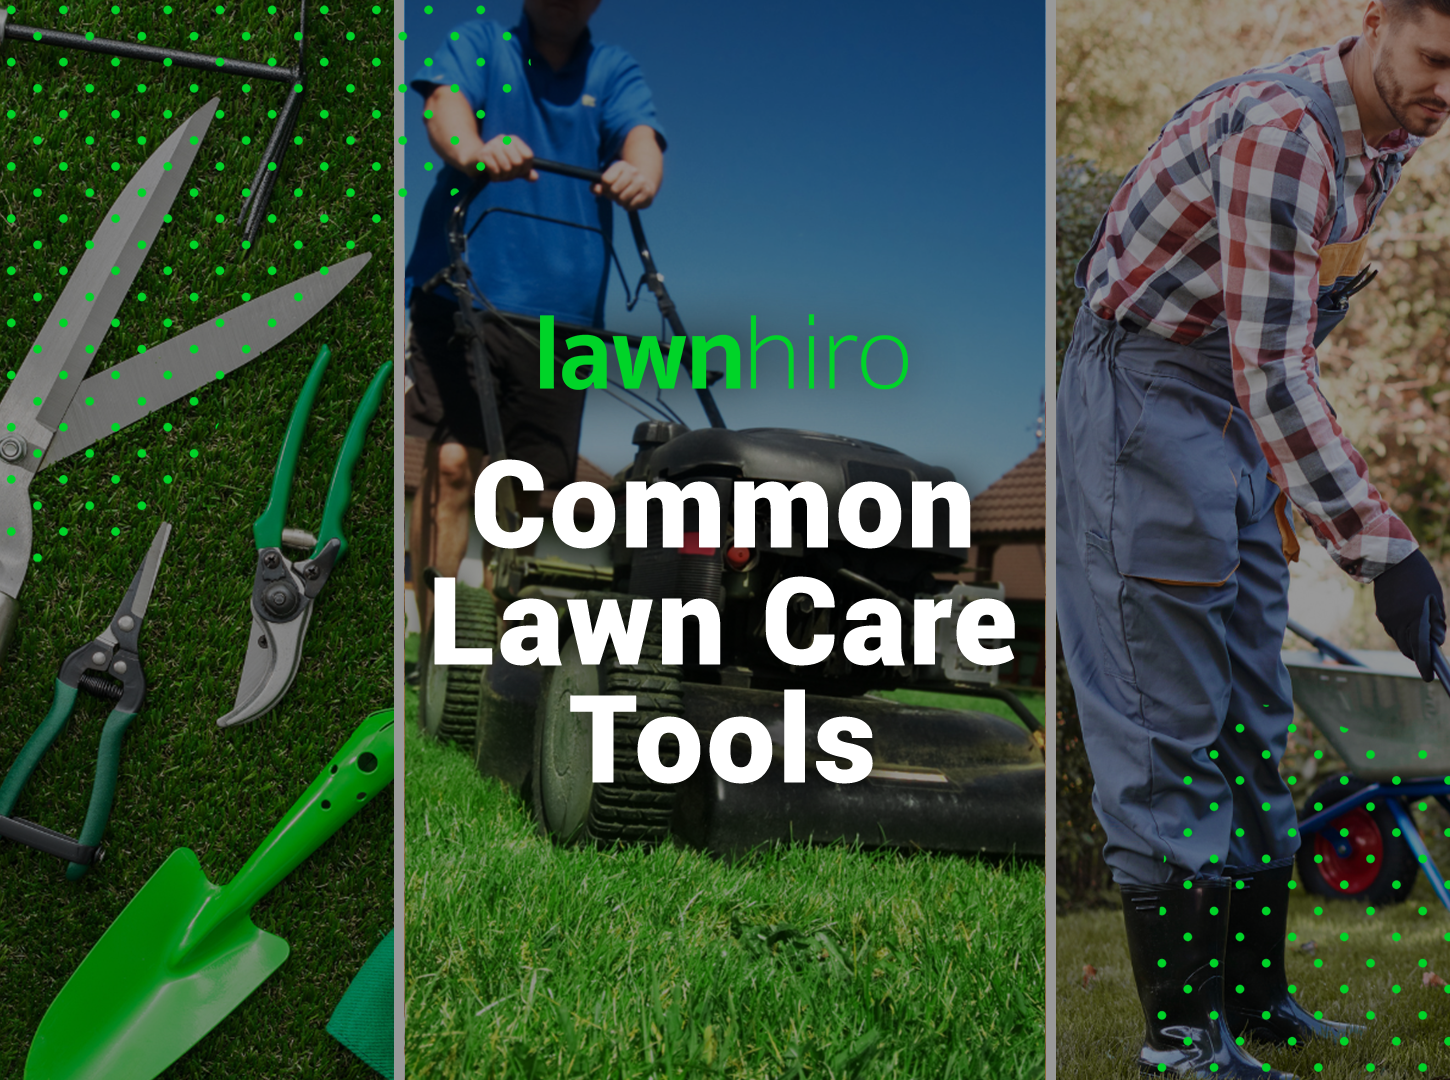 Common Lawn Care Tools and Equipment - Lawnhiro